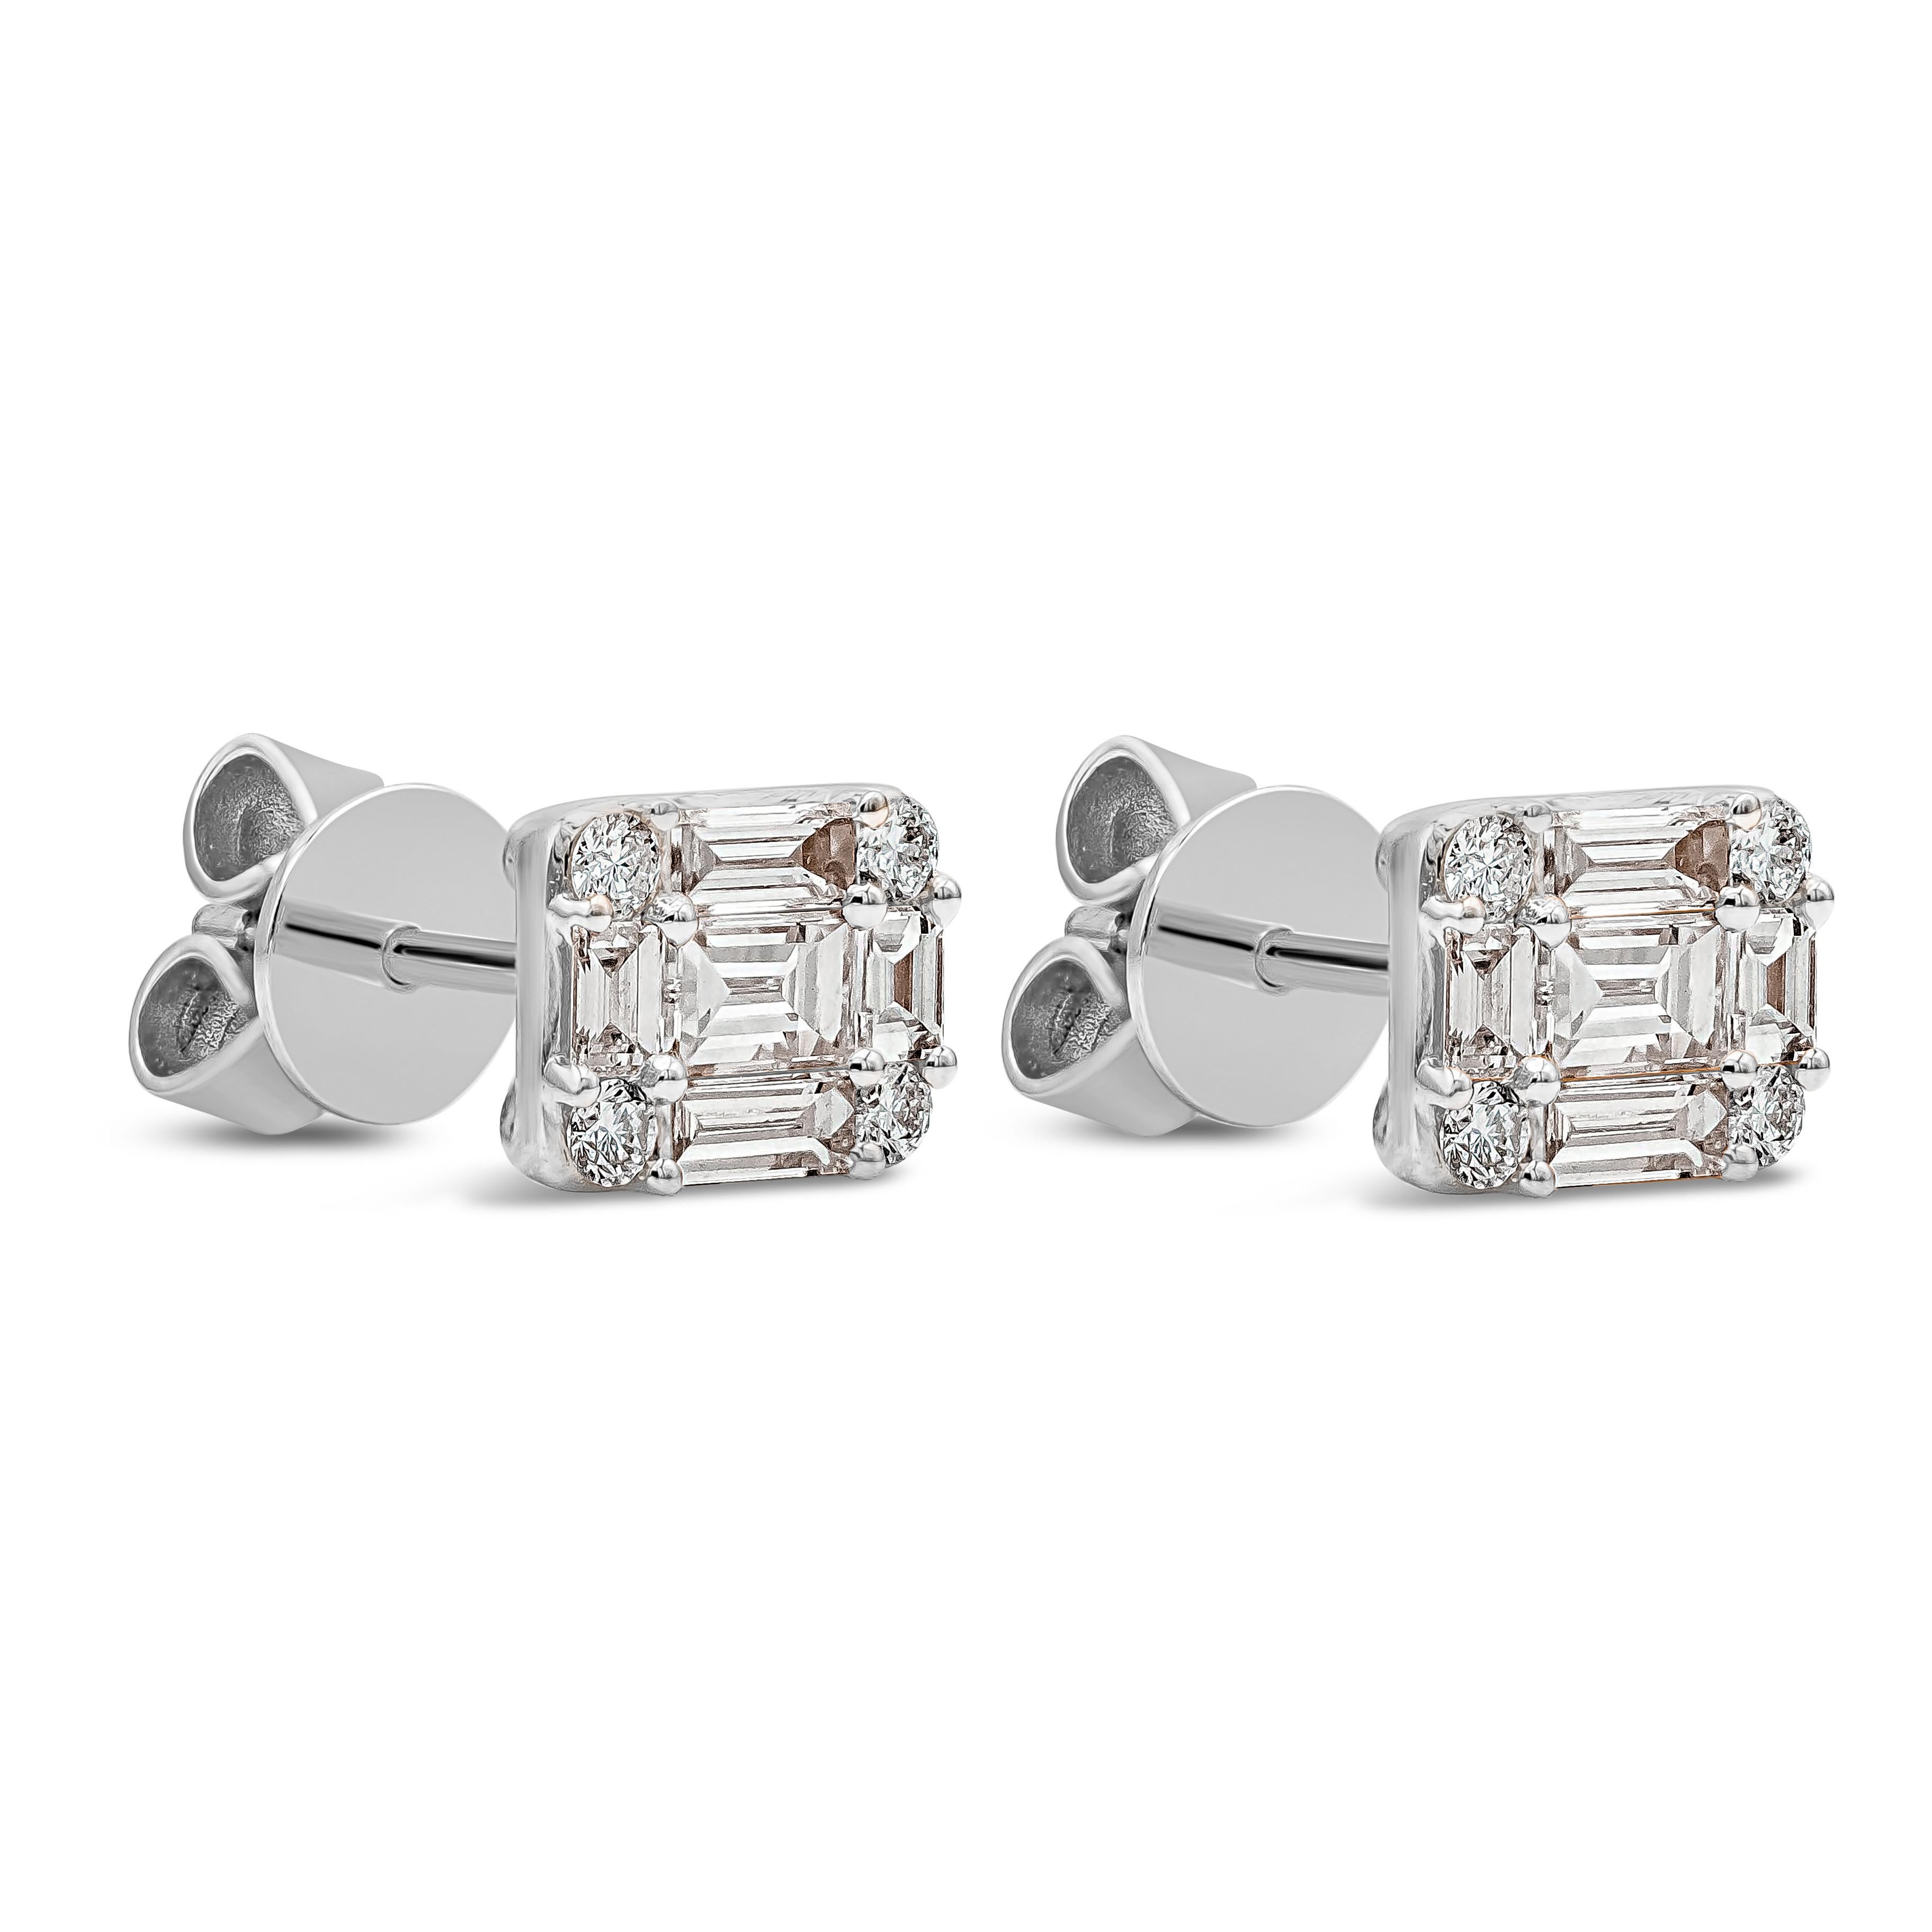 Contemporary Roman Malakov 0.57 Carats Total Baguette and Round Cut Diamond Stud Earrings